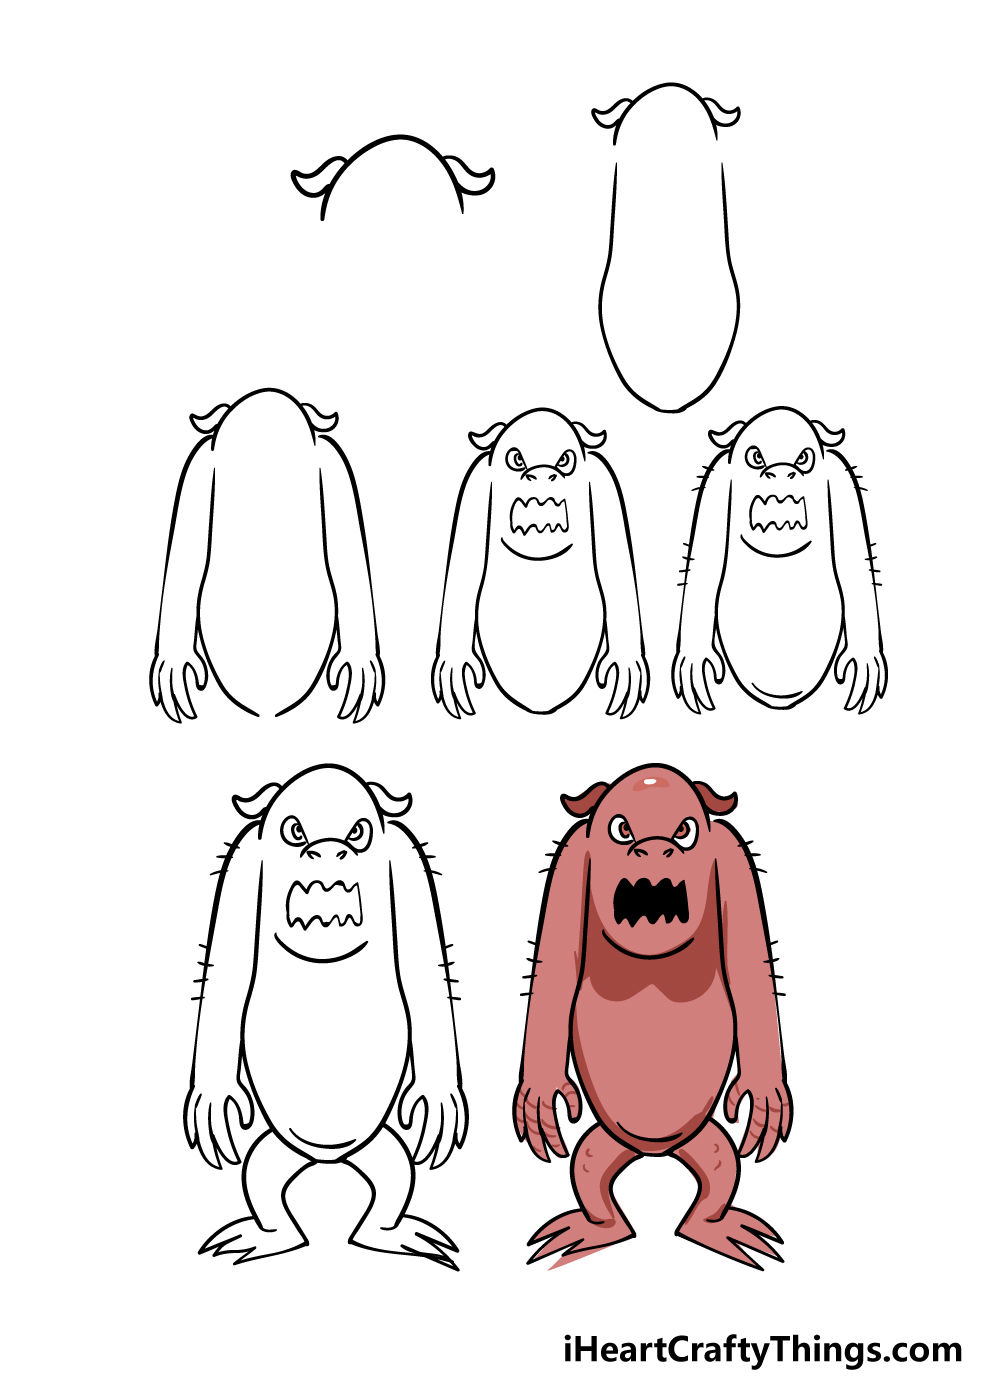 how to draw monster in 7 steps